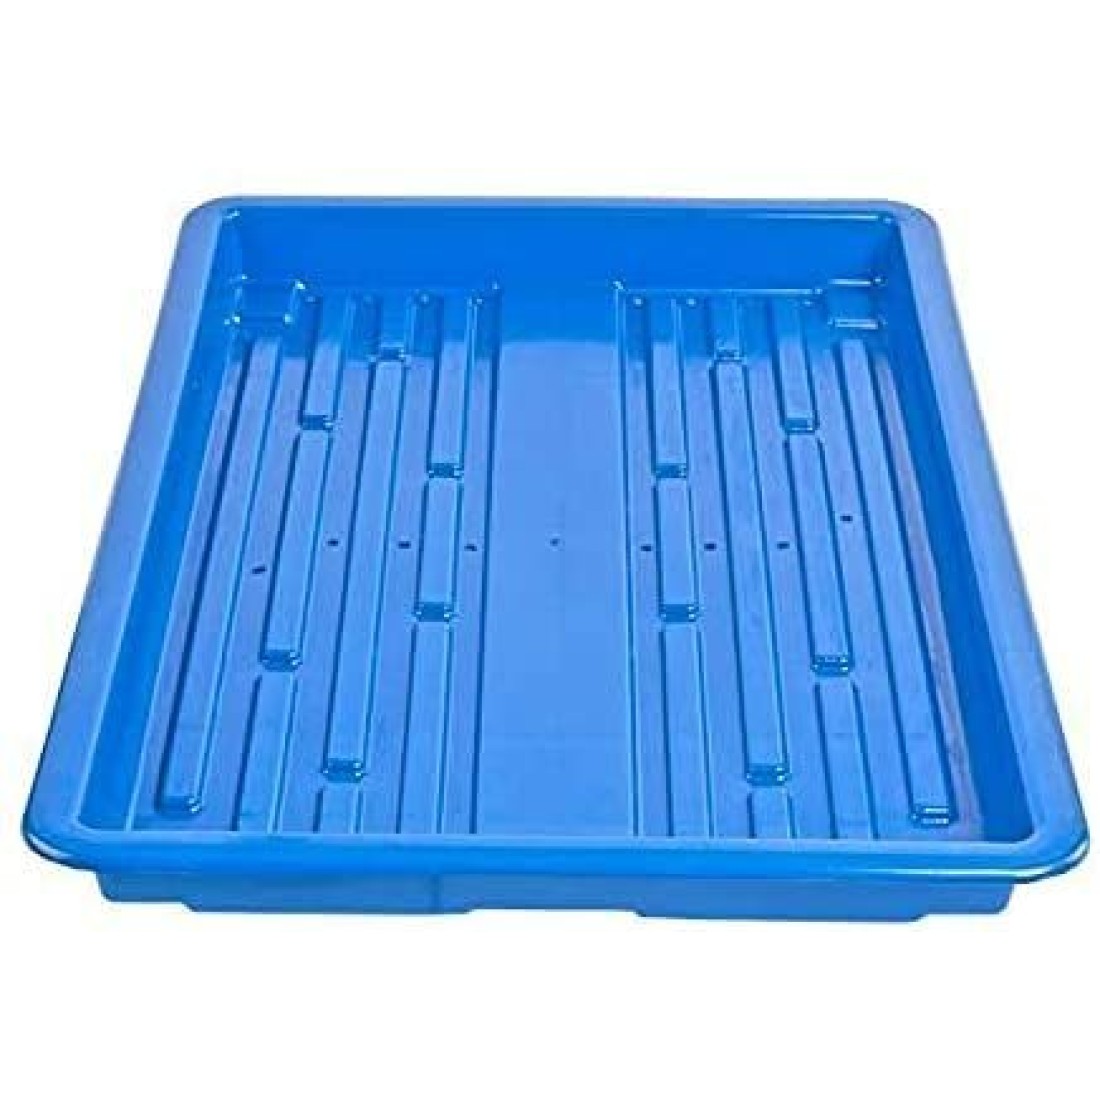 Hydroponics Germination Plastic Tray for Fodder Maize/microgreens/Seedling/Wheatgrass (Blue), pack of 3 trays 2